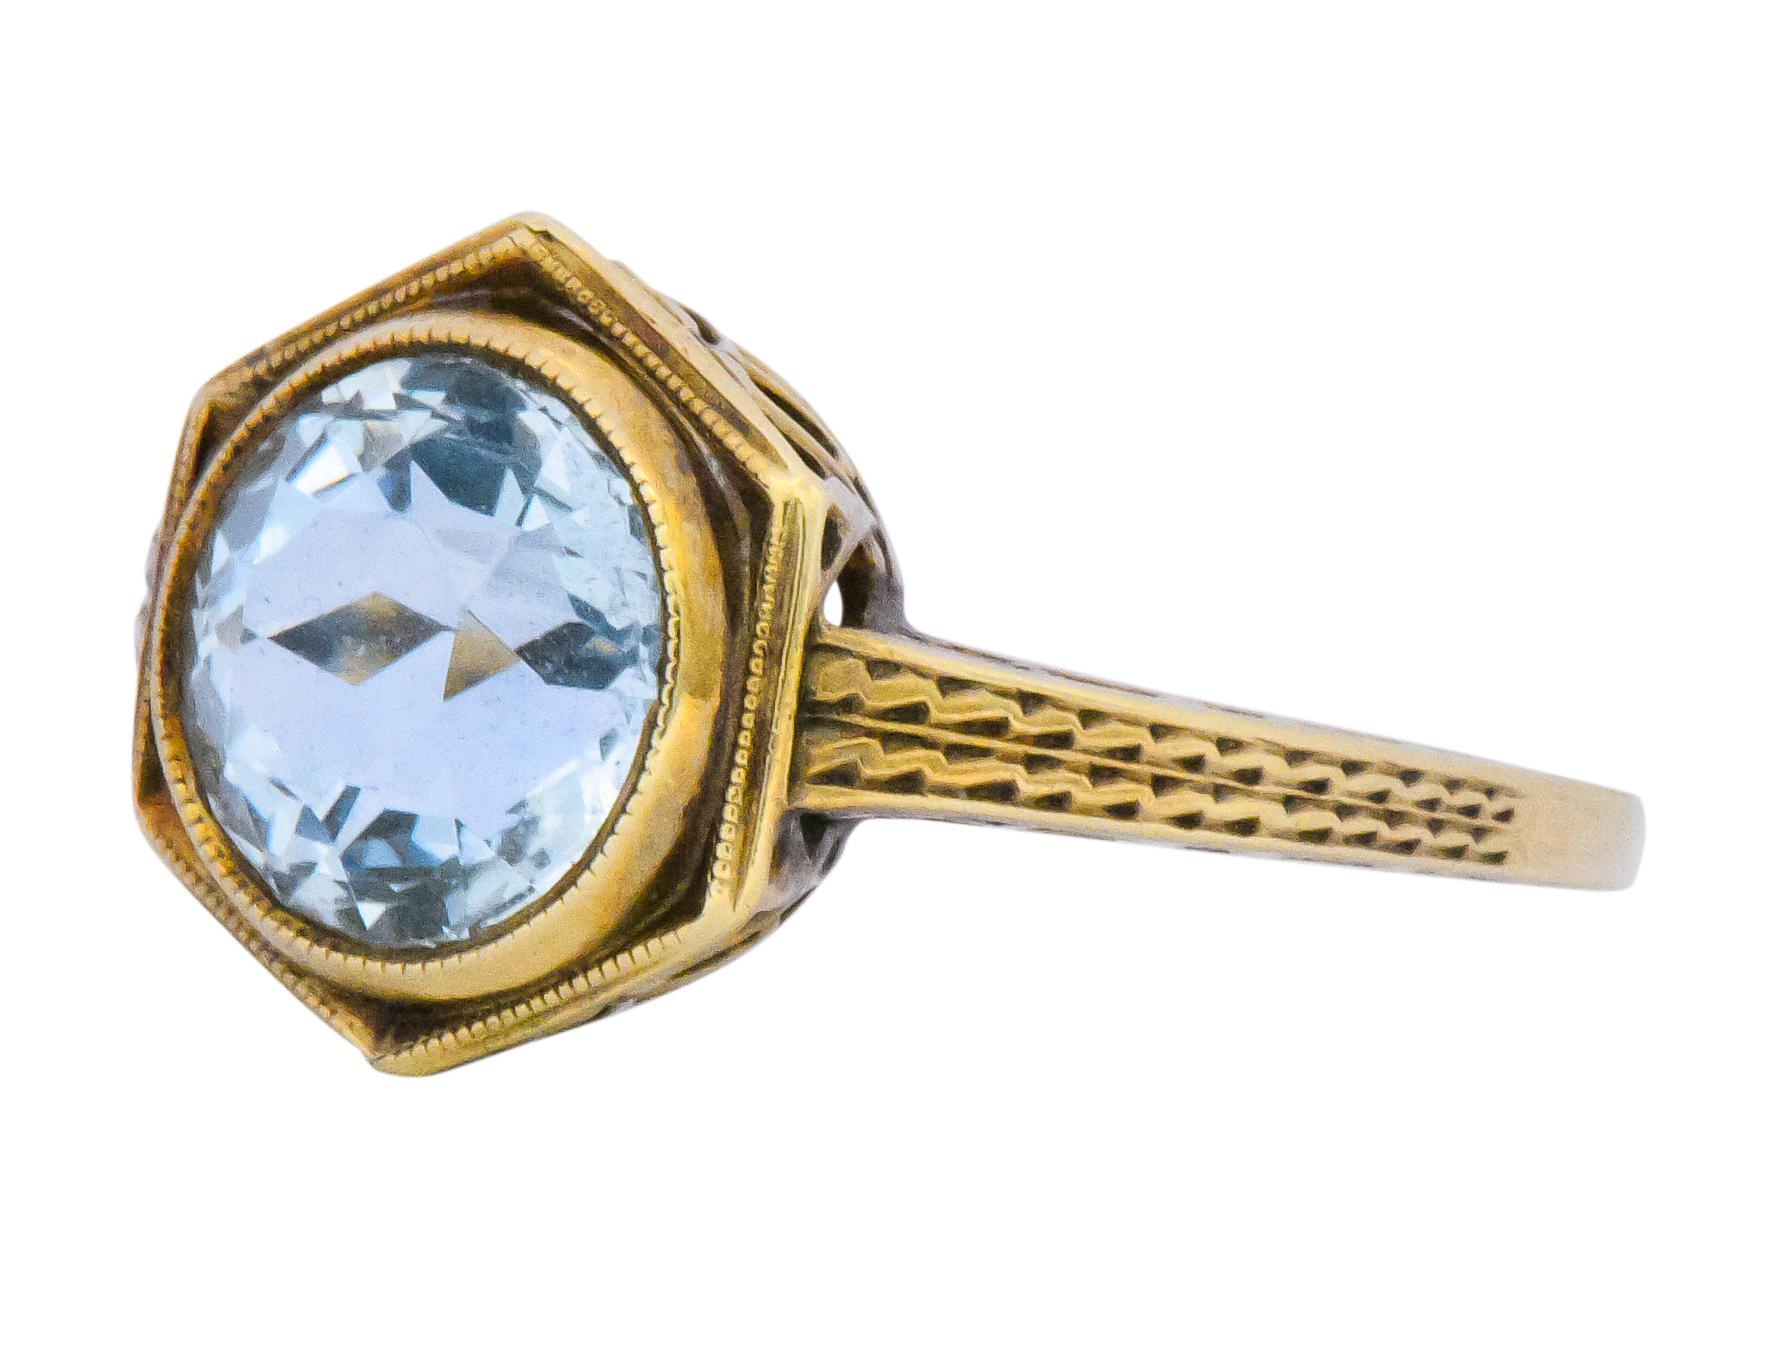 Centering an old European cut aquamarine weighing approximately 2.50 carats, beautiful light blue

Bezel set in a hexagonal surround

Pierced and engraved gold gallery and shank

Stamped 14K with maker's mark

Ring Size: 5 1/2 & Sizable

Top